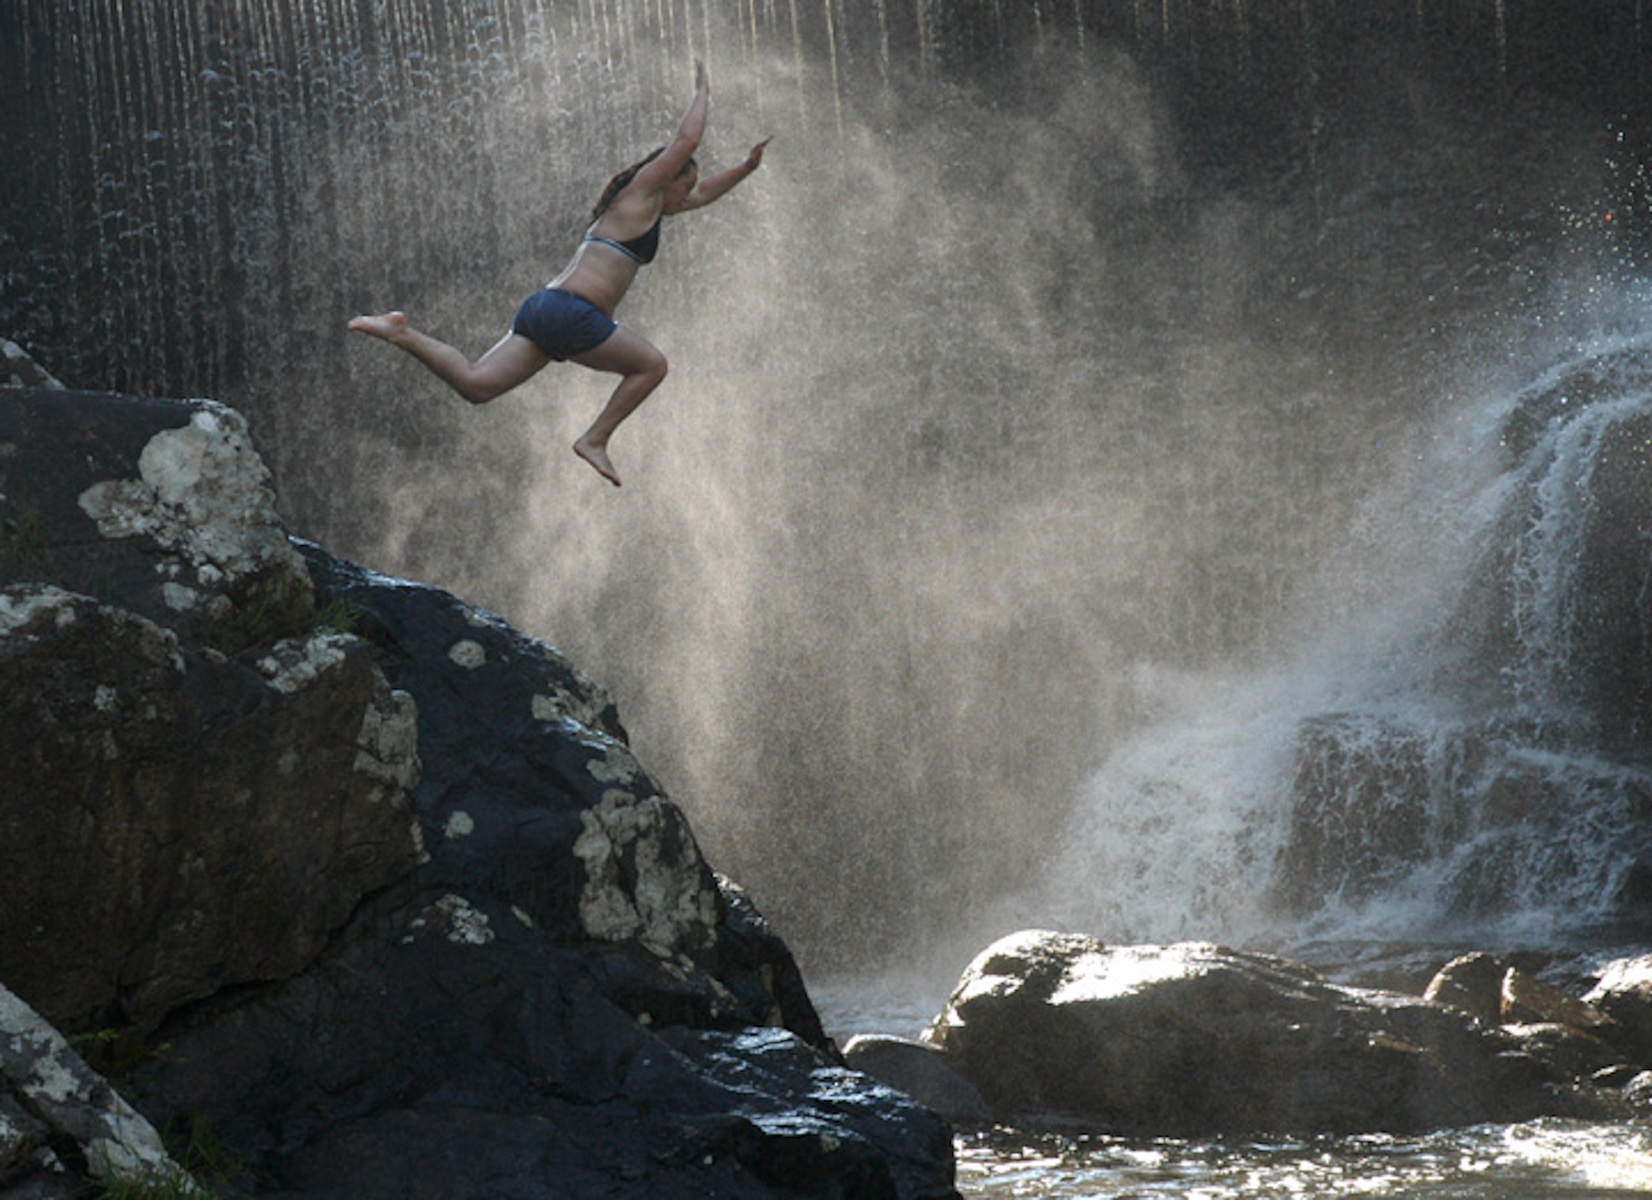 Ashley Jones, 30, from West Springfield, jumping from the rocks.